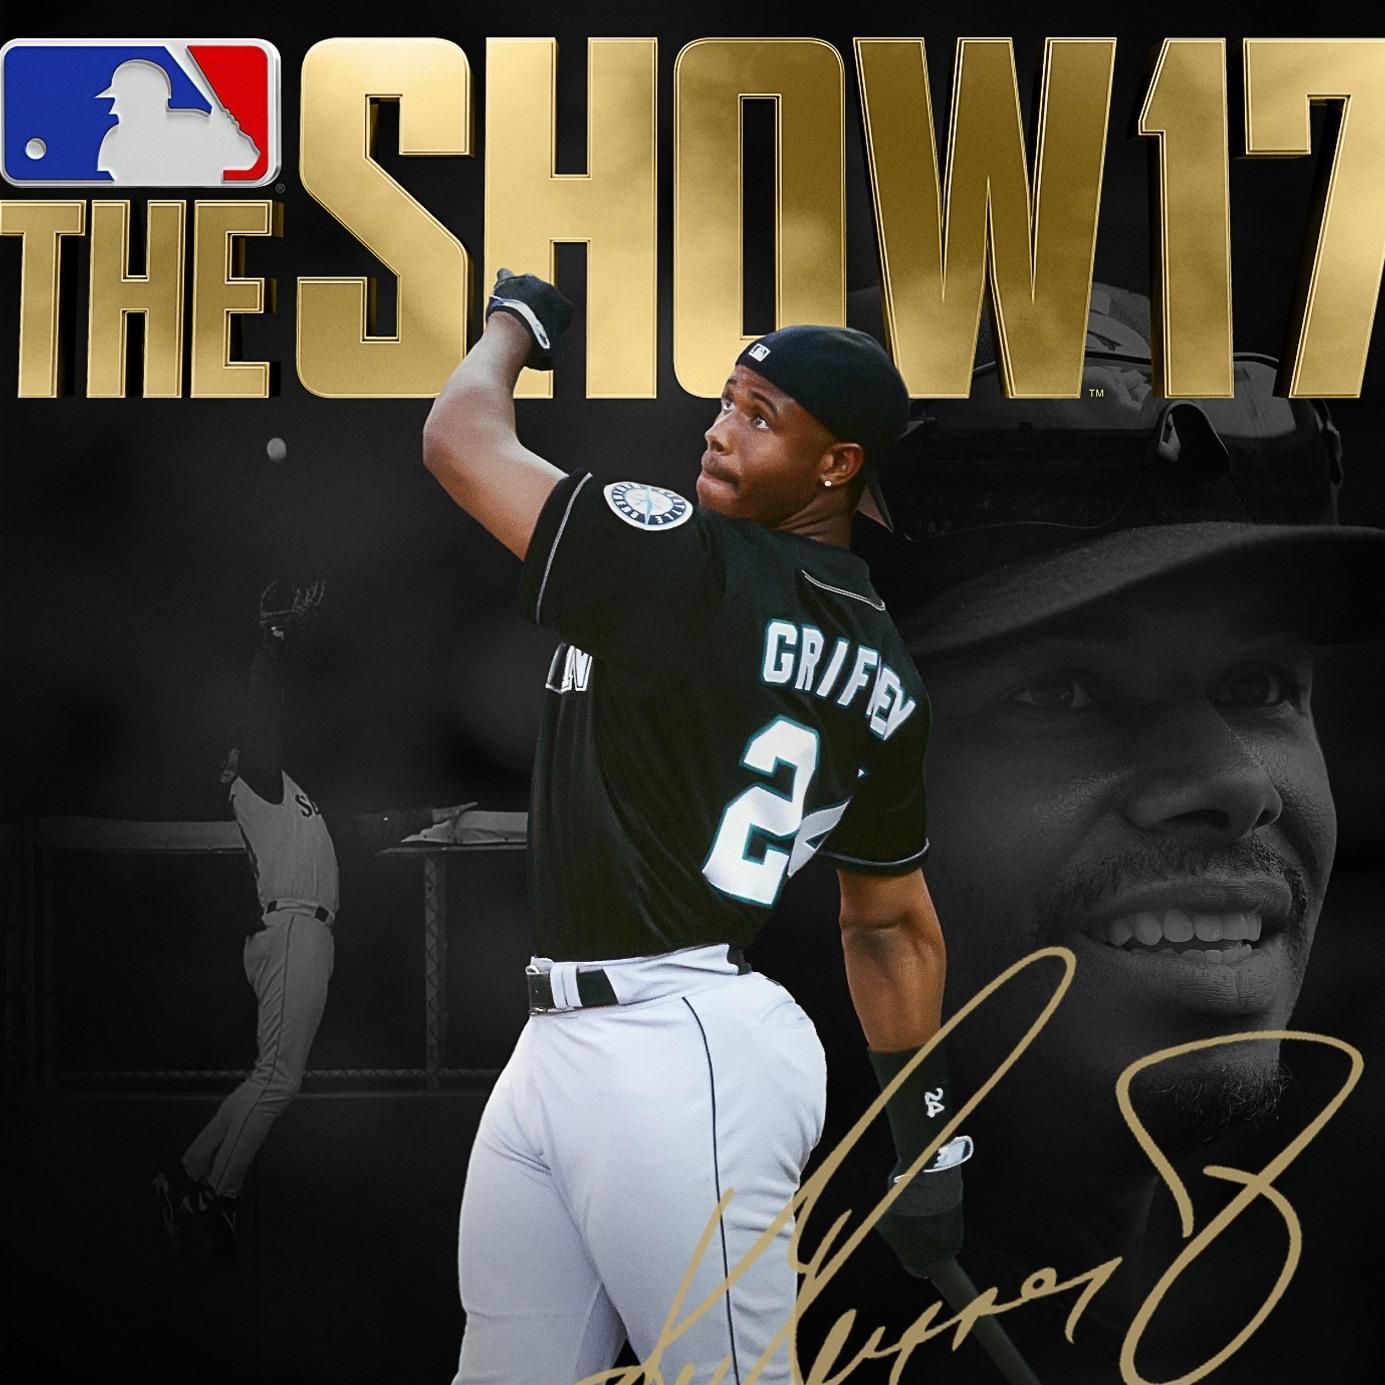 Swing for the fences in the 2017 edition of the popular baseball franchise MLB The Show 17.